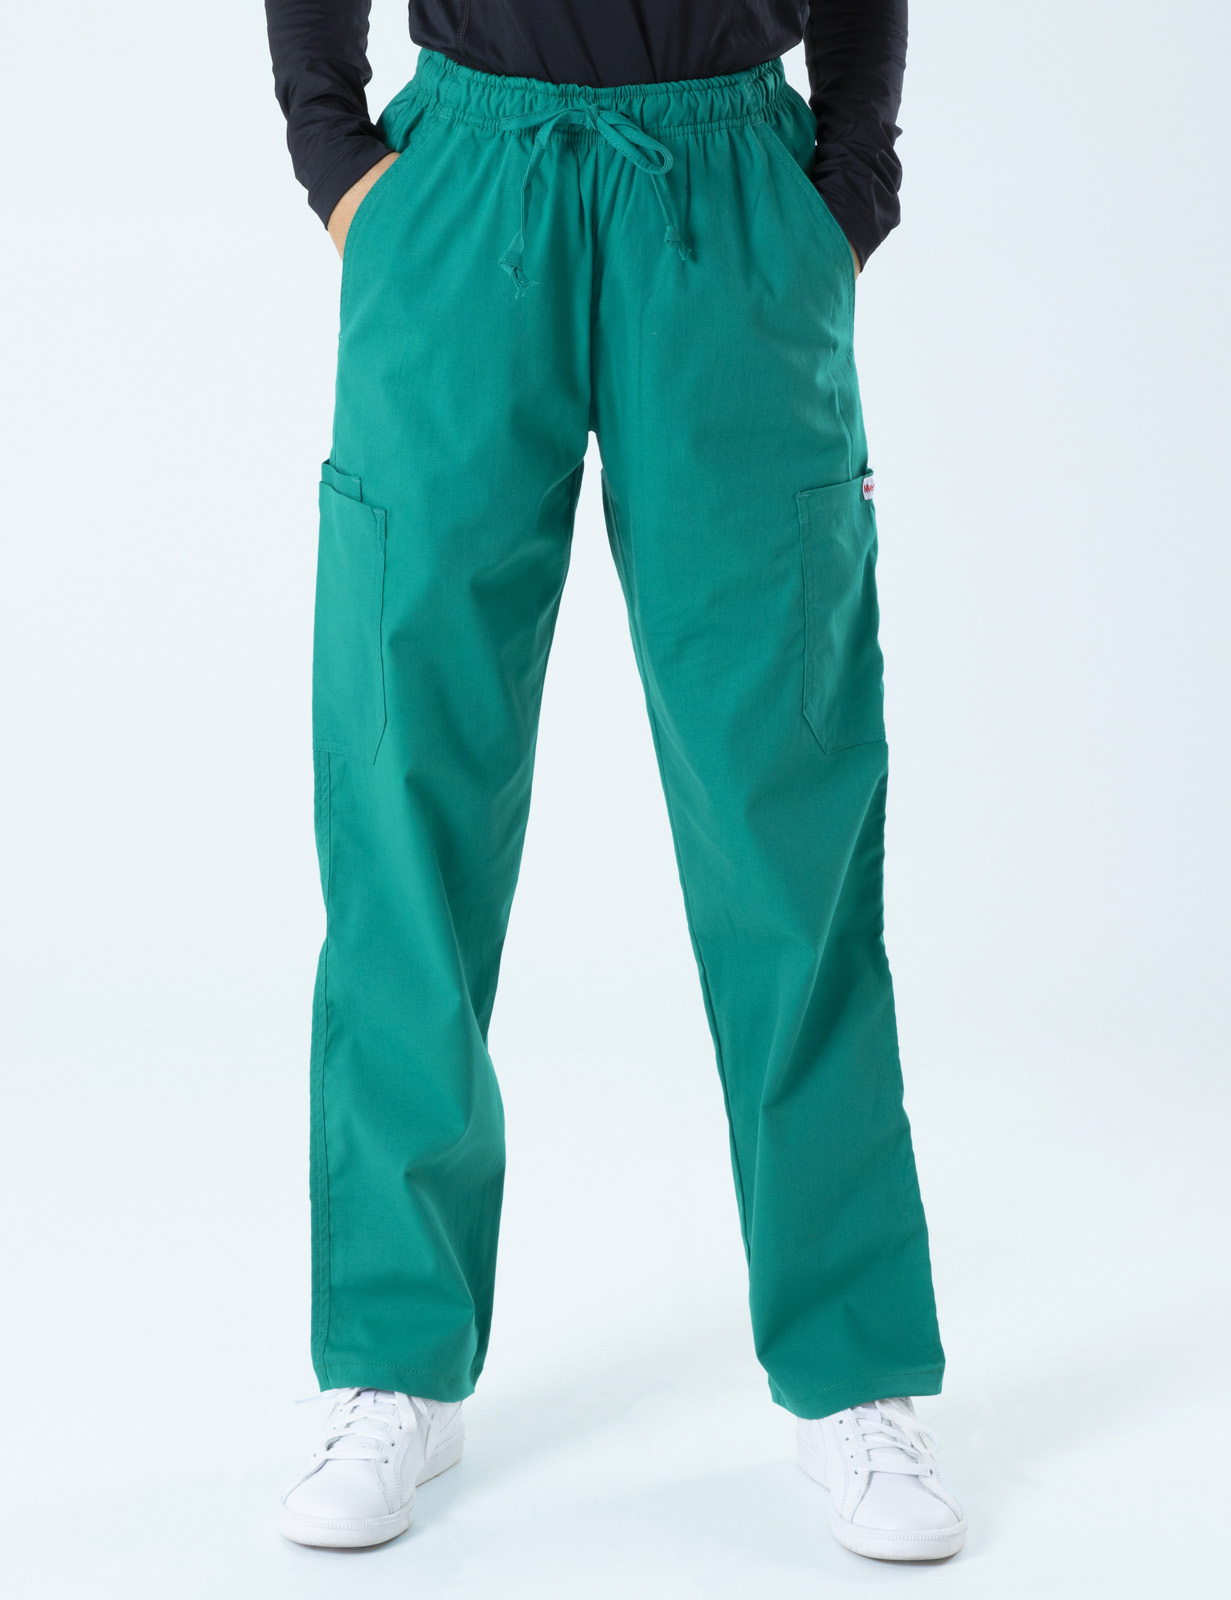 Darwin Hospital - ED Doctor (Women's Fit Solid Scrub Top and Cargo Pants in Hunter incl Logos)